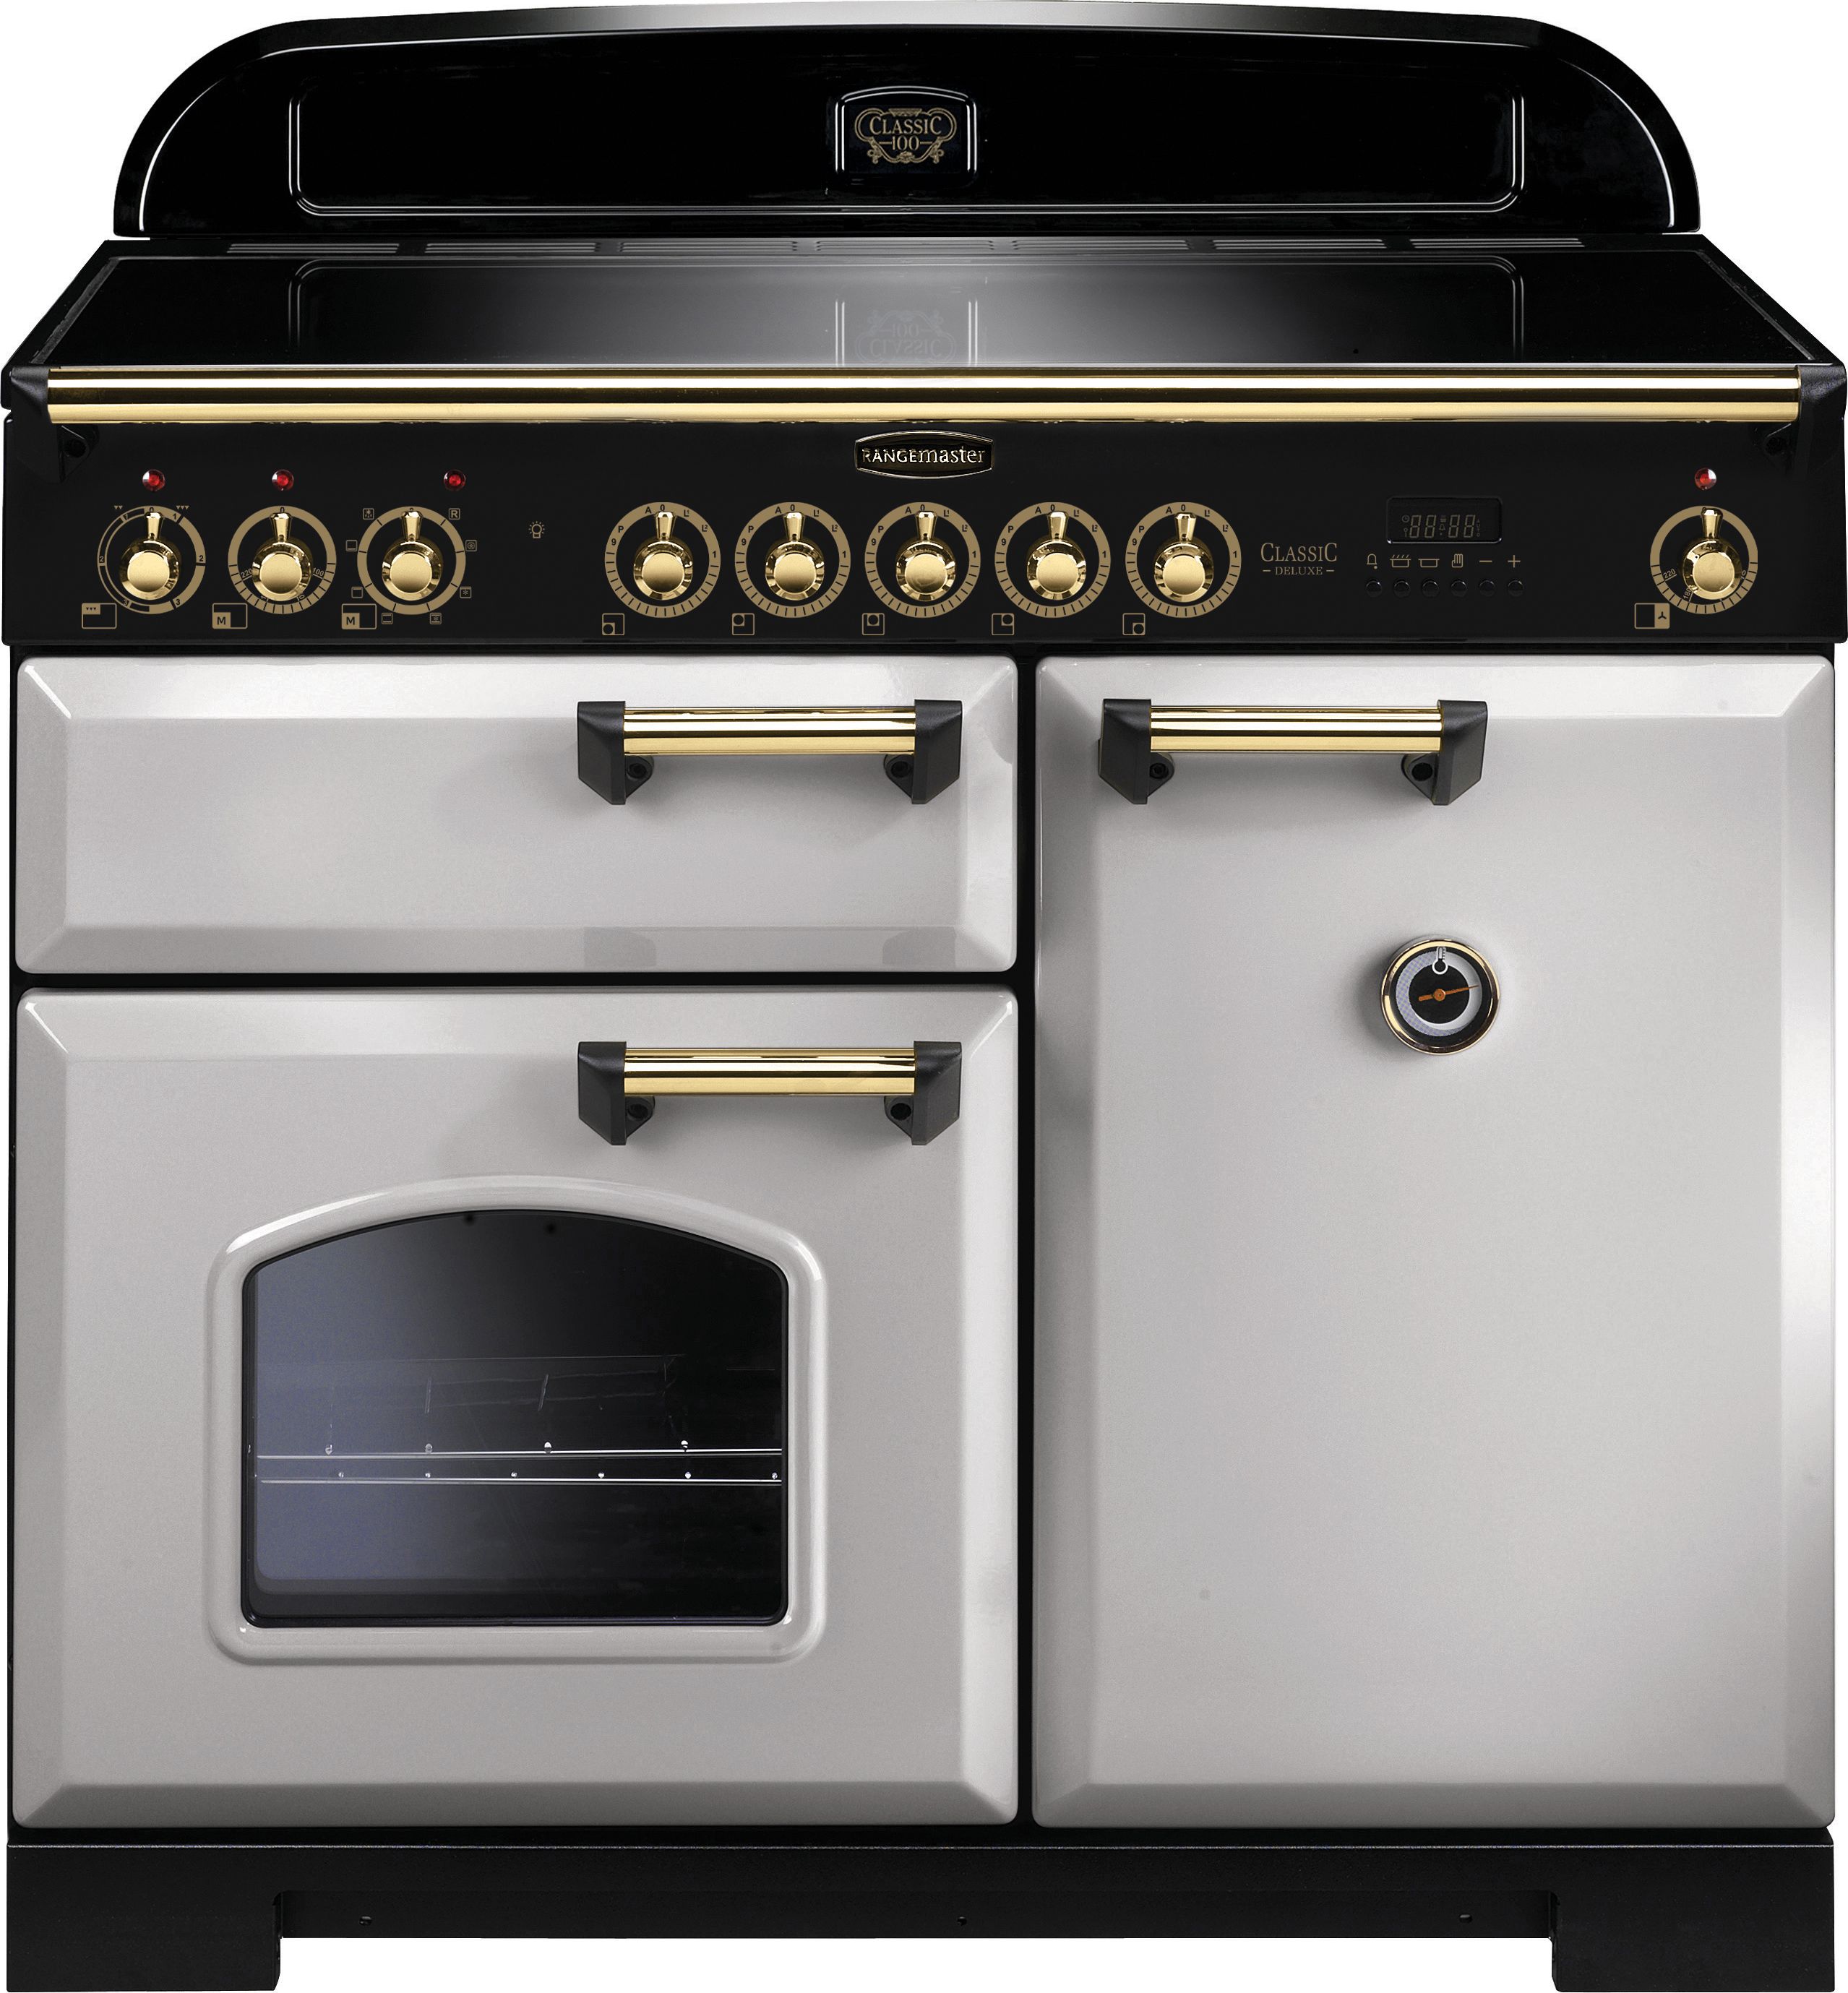 Rangemaster Classic Deluxe CDL100EIRP/B 100cm Electric Range Cooker with Induction Hob - Royal Pearl / Brass - A/A Rated, Grey